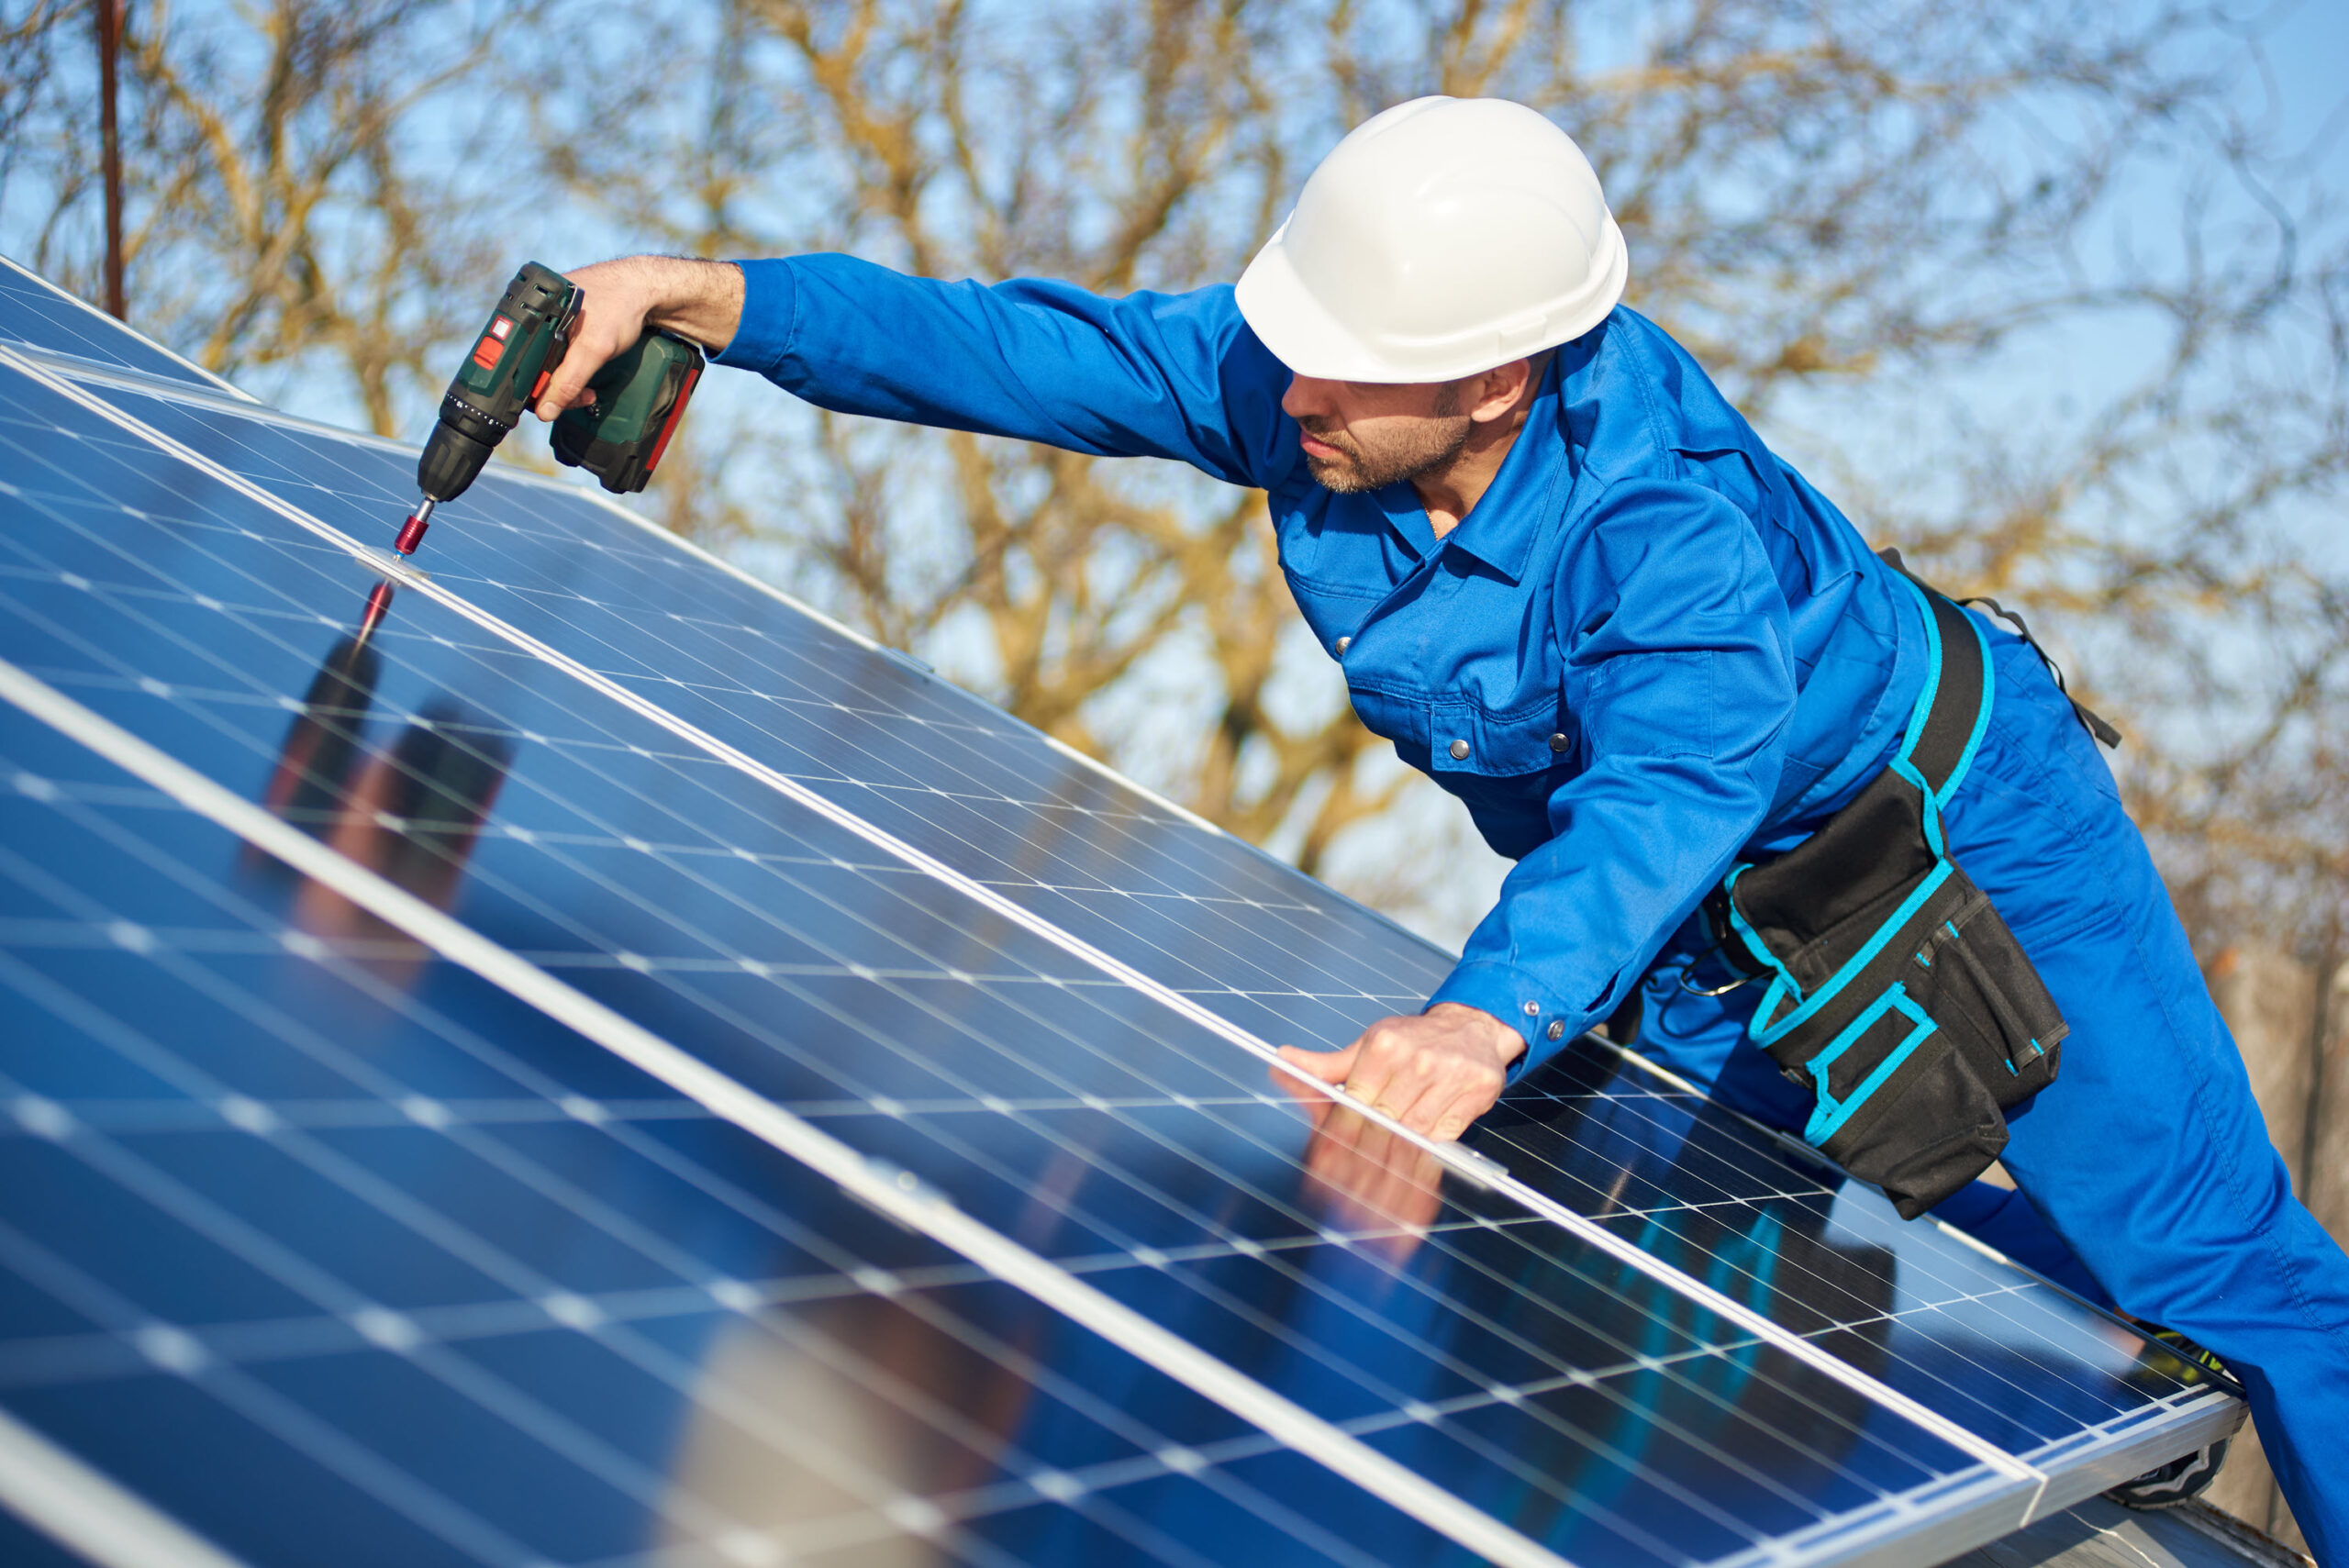 A worker drilling on solar panels